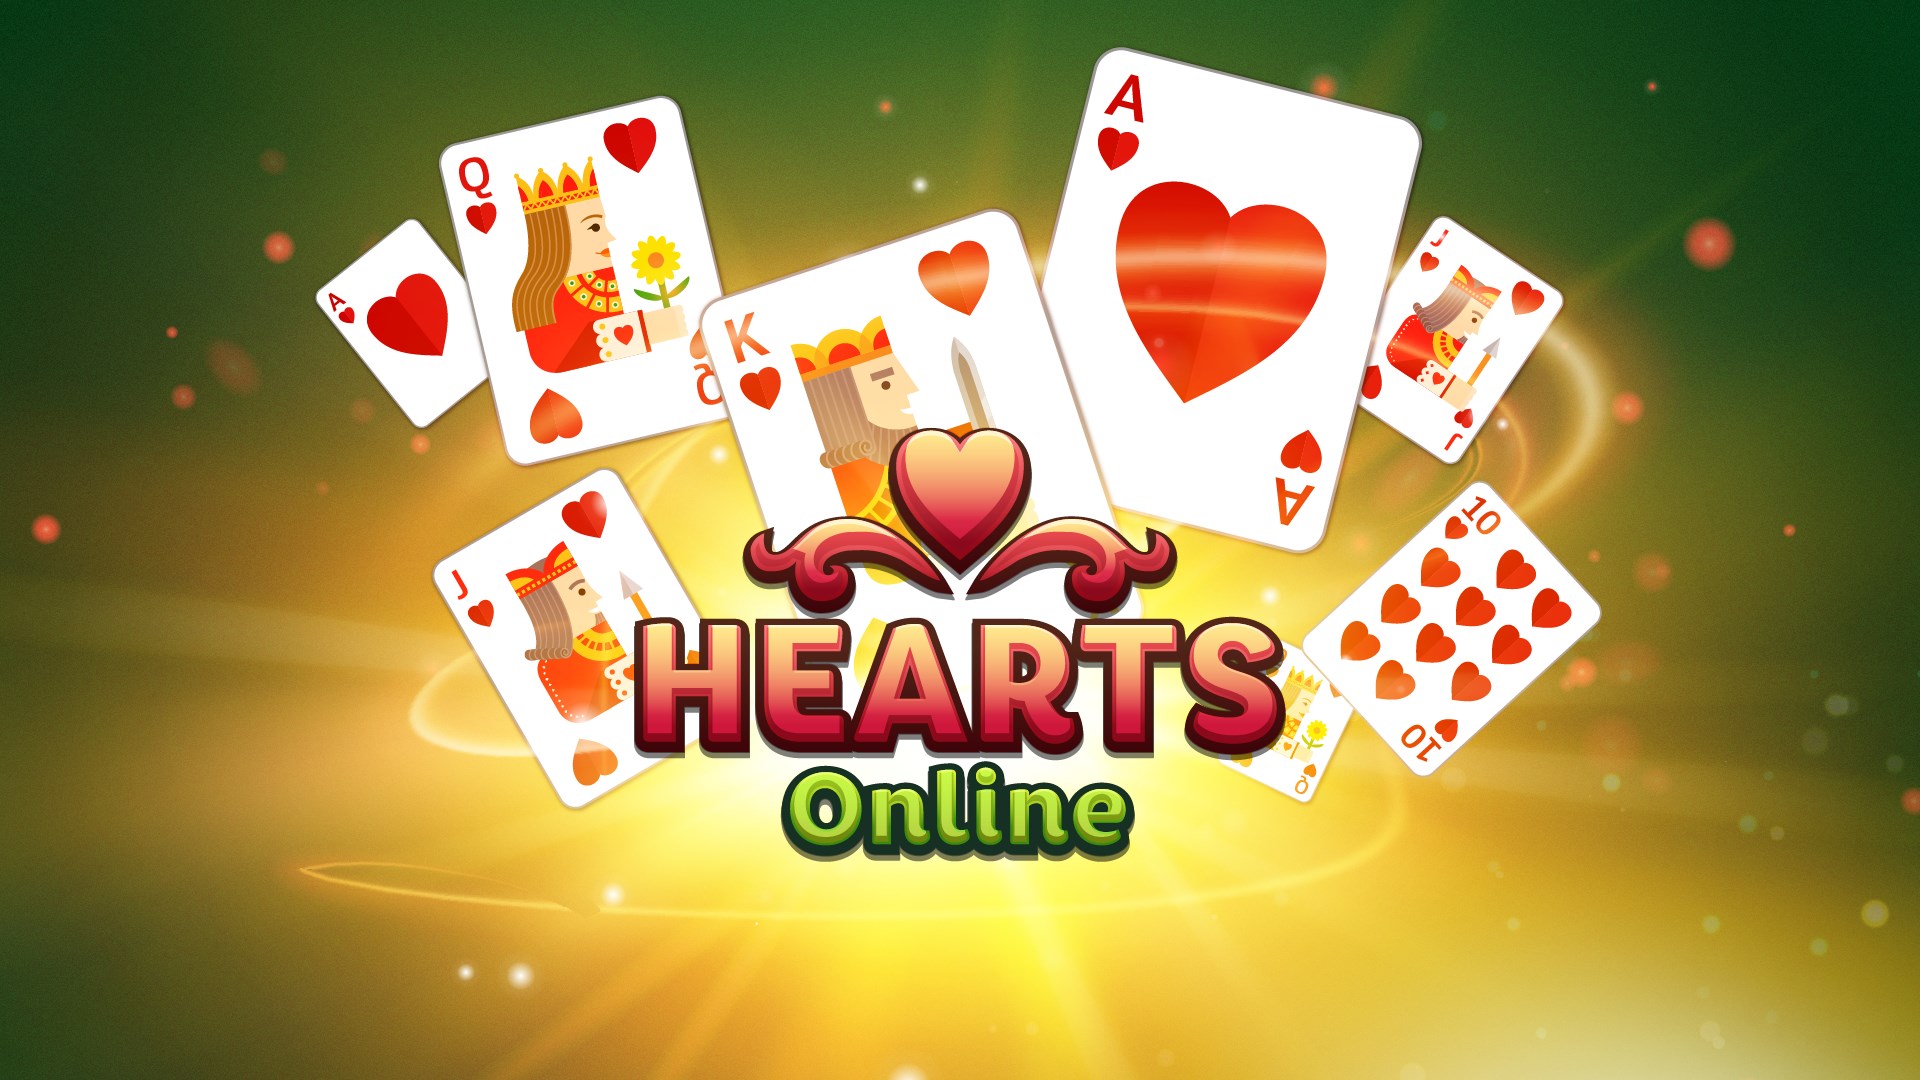 Free online hearts game no download autocad autodesk student